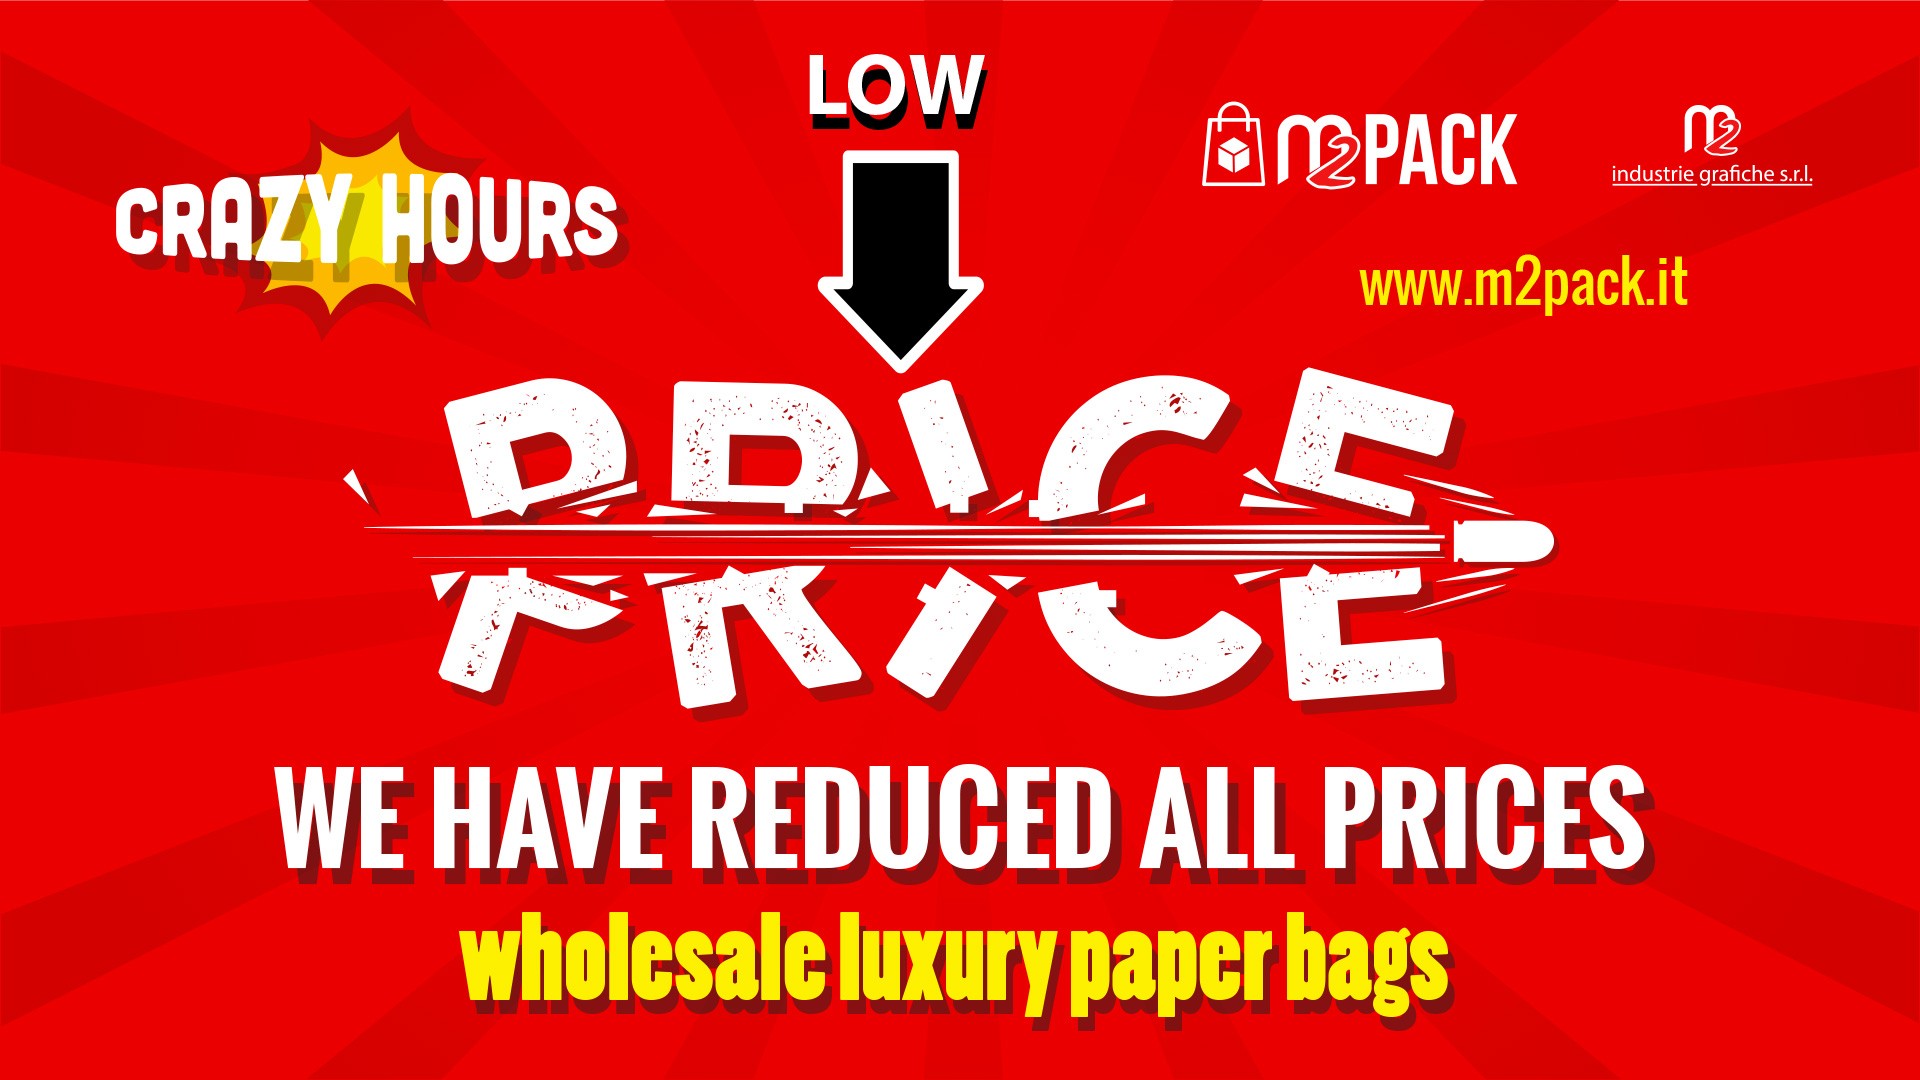 LOW PRICE PAPER BAGS - WE HAVE REDUCED THE PRICES!